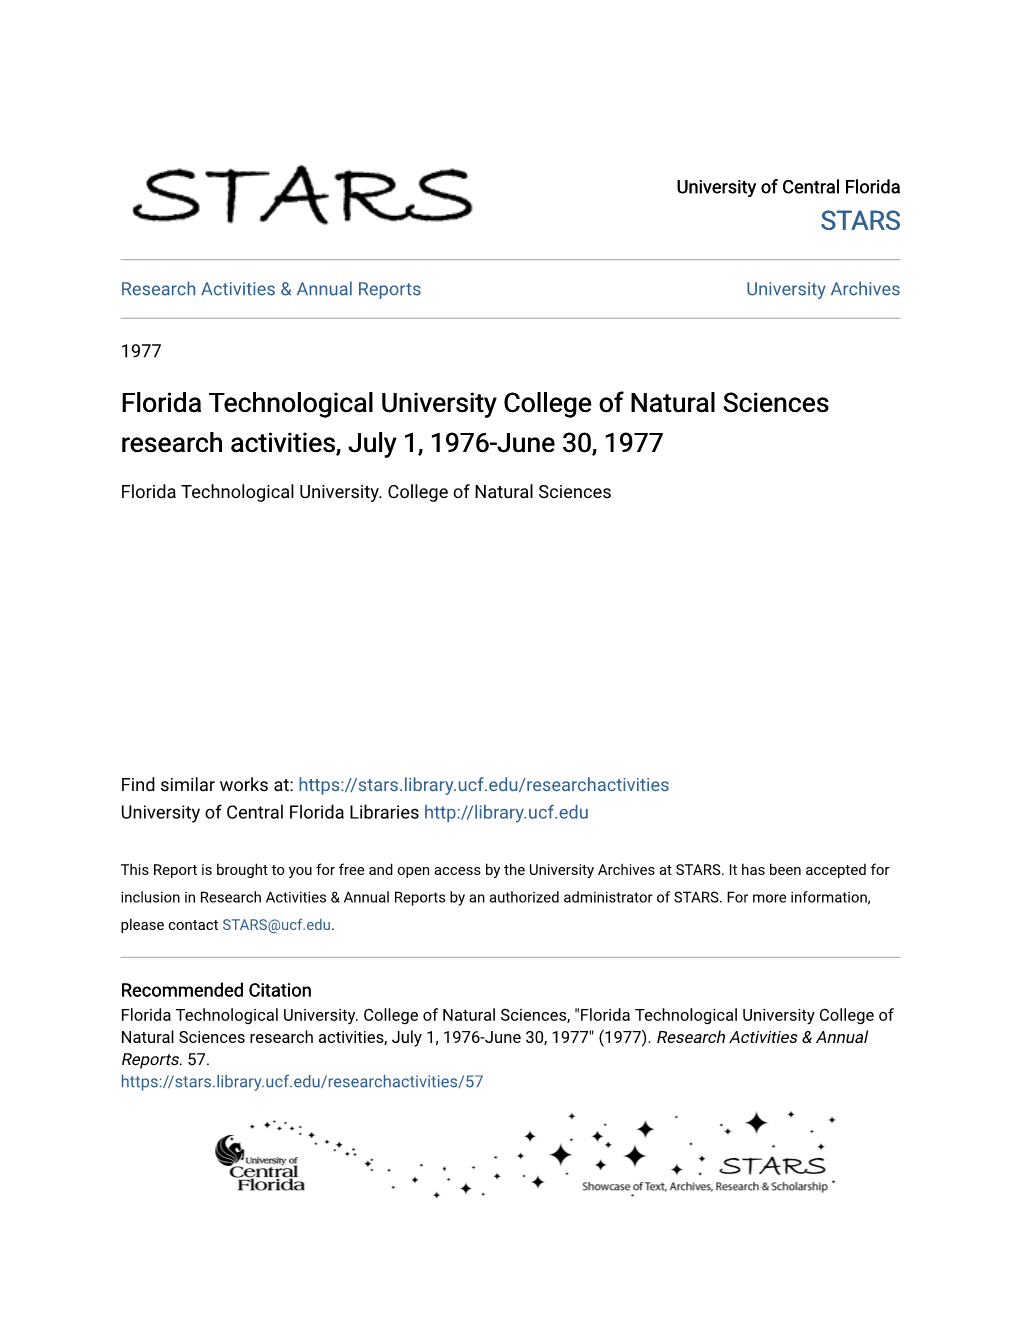 Florida Technological University College of Natural Sciences Research Activities, July 1, 1976-June 30, 1977